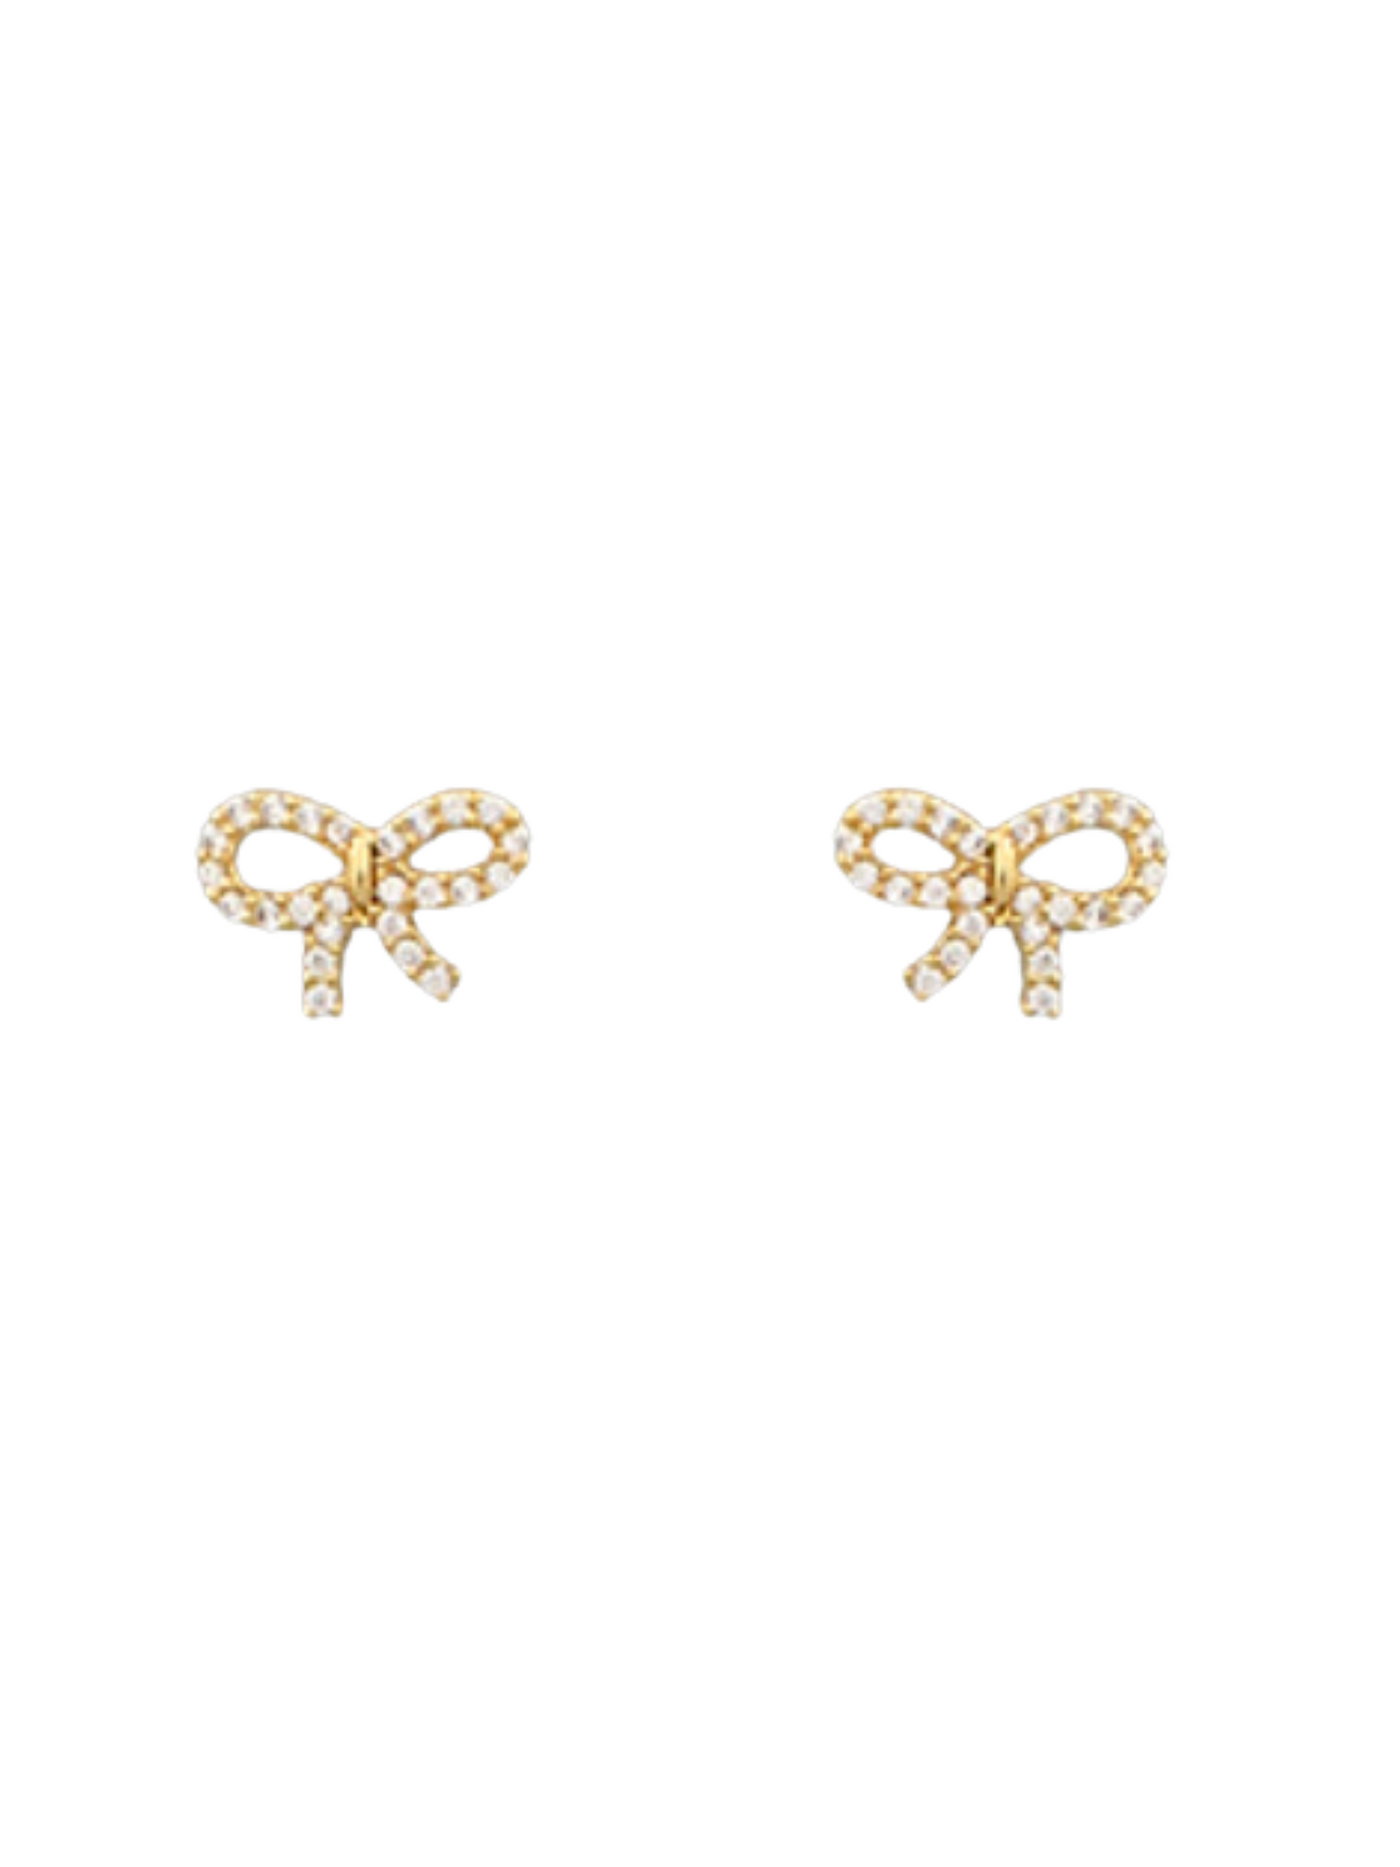 Crystal Bow Earrings in gold on white background.